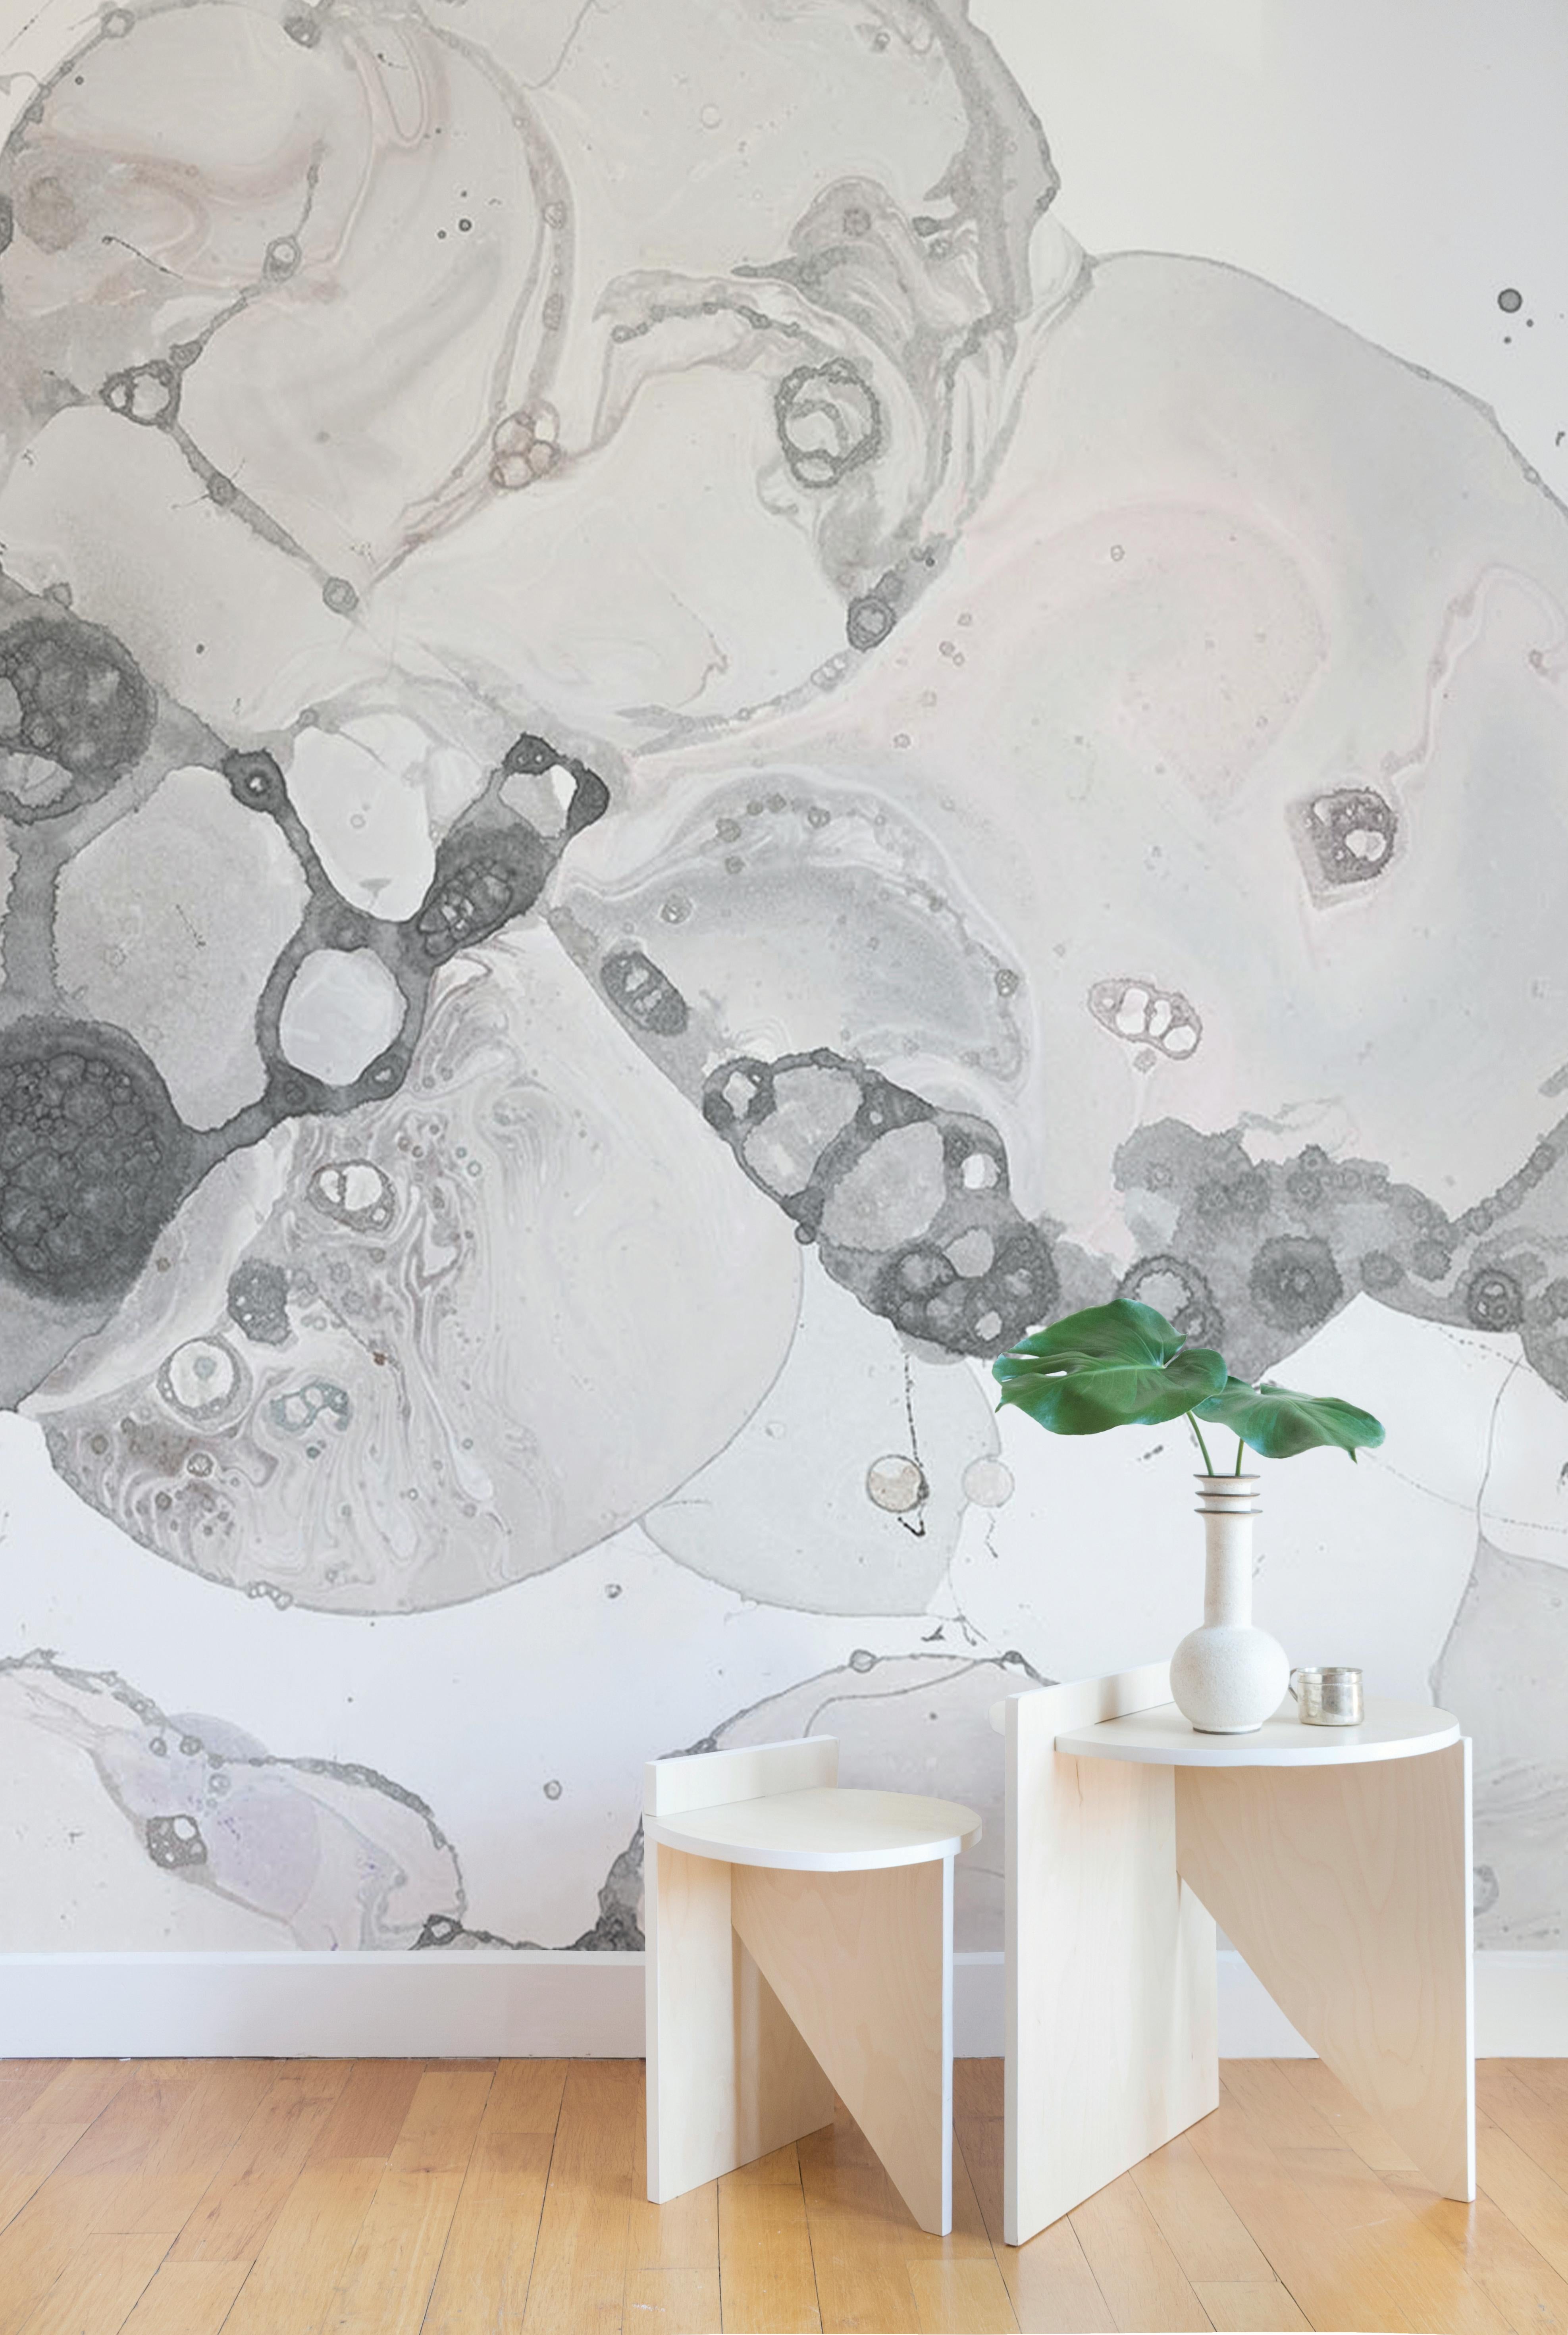 American BCXSY Microcosmos Drift Wallpaper or Wall Mural in Matte Grayscale Bubbles For Sale